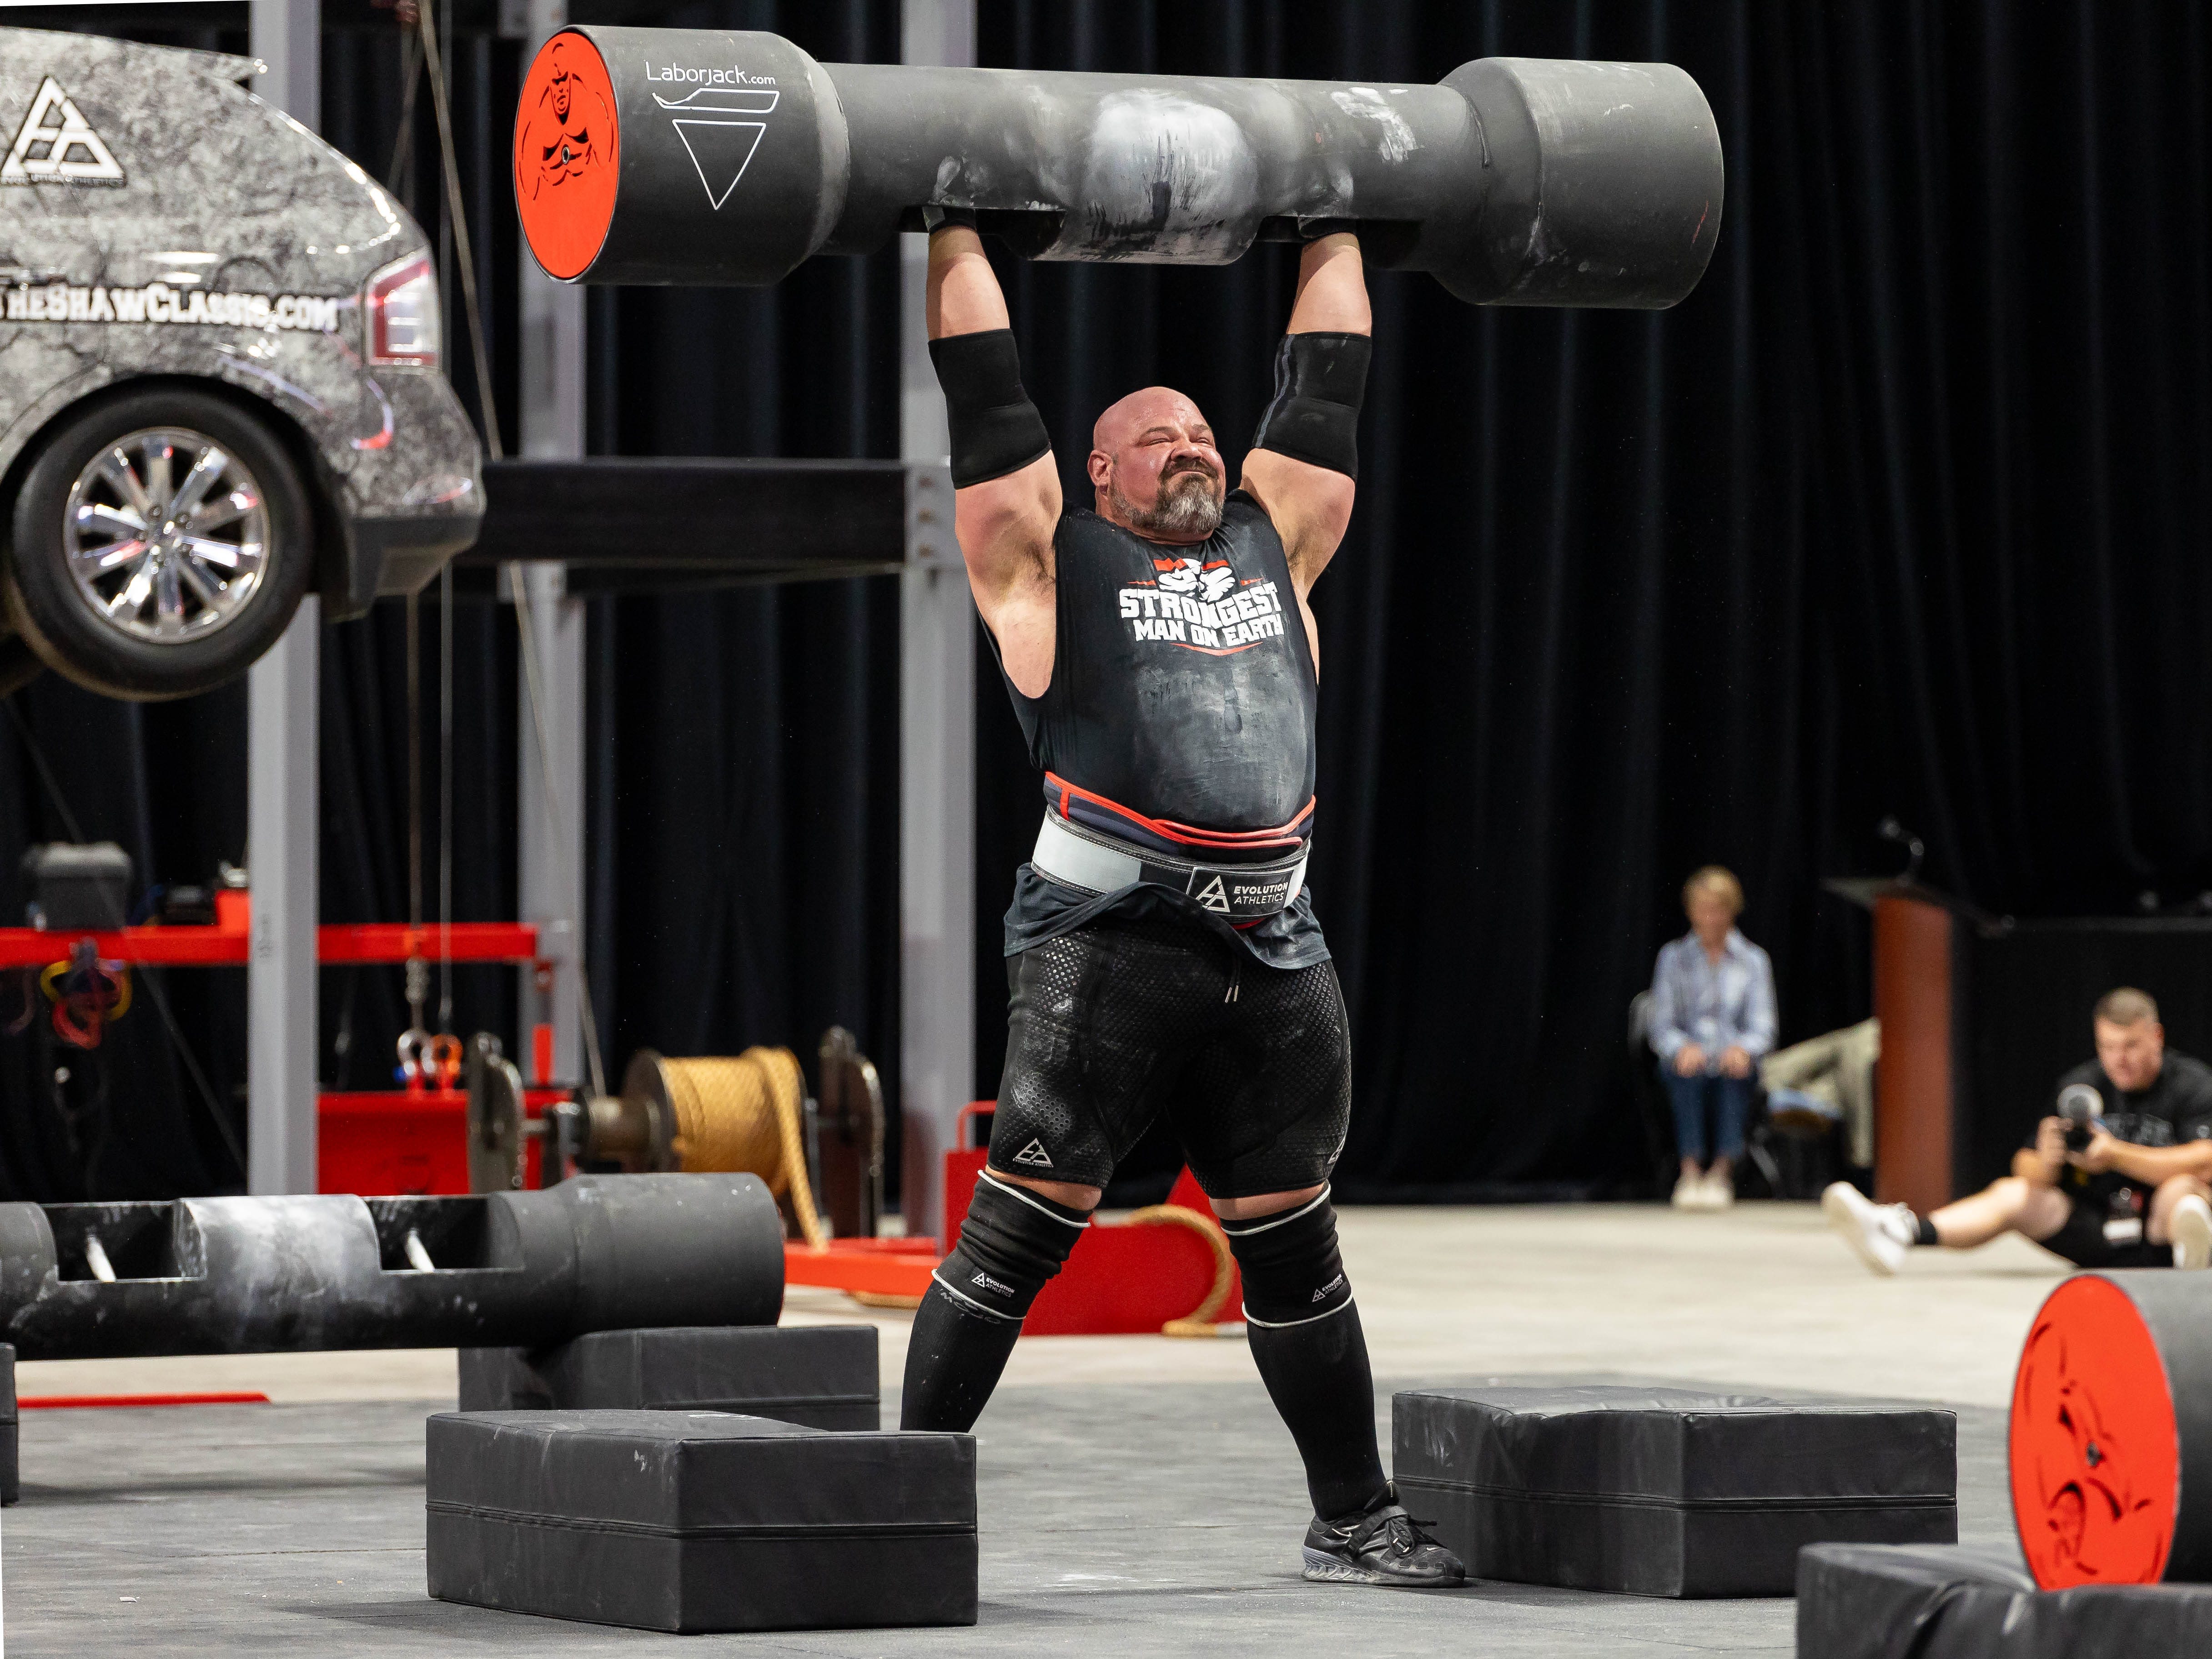 3 exercises you should be doing to build muscle, according to the World's Strongest Man